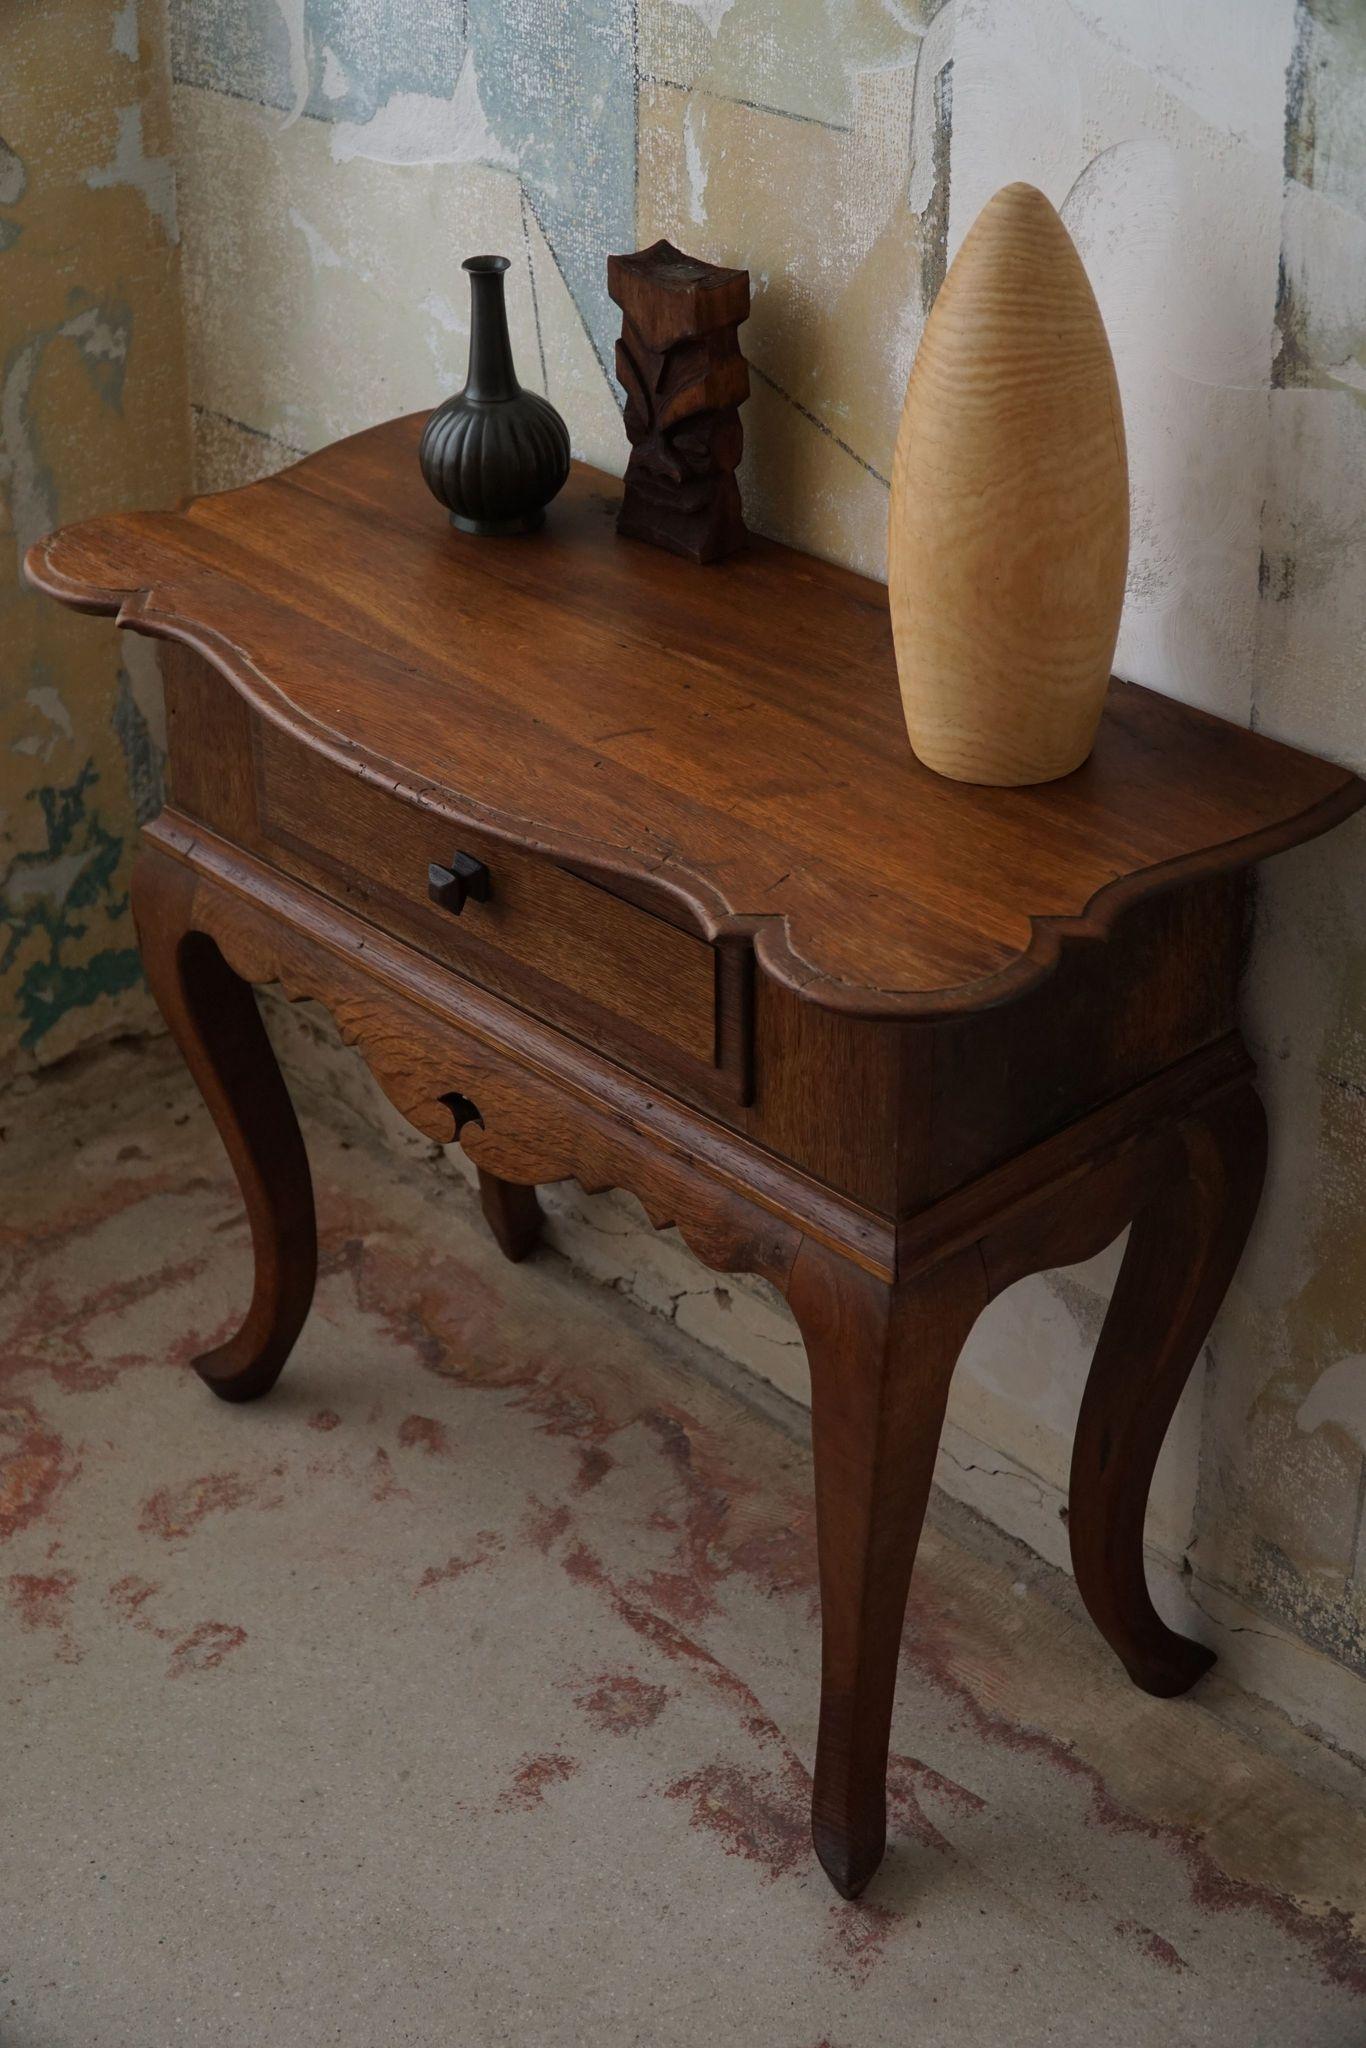 Danish Baroque Style Entry Table in Solid Oak, By a Danish Cabinetmaker, 1920s For Sale 2